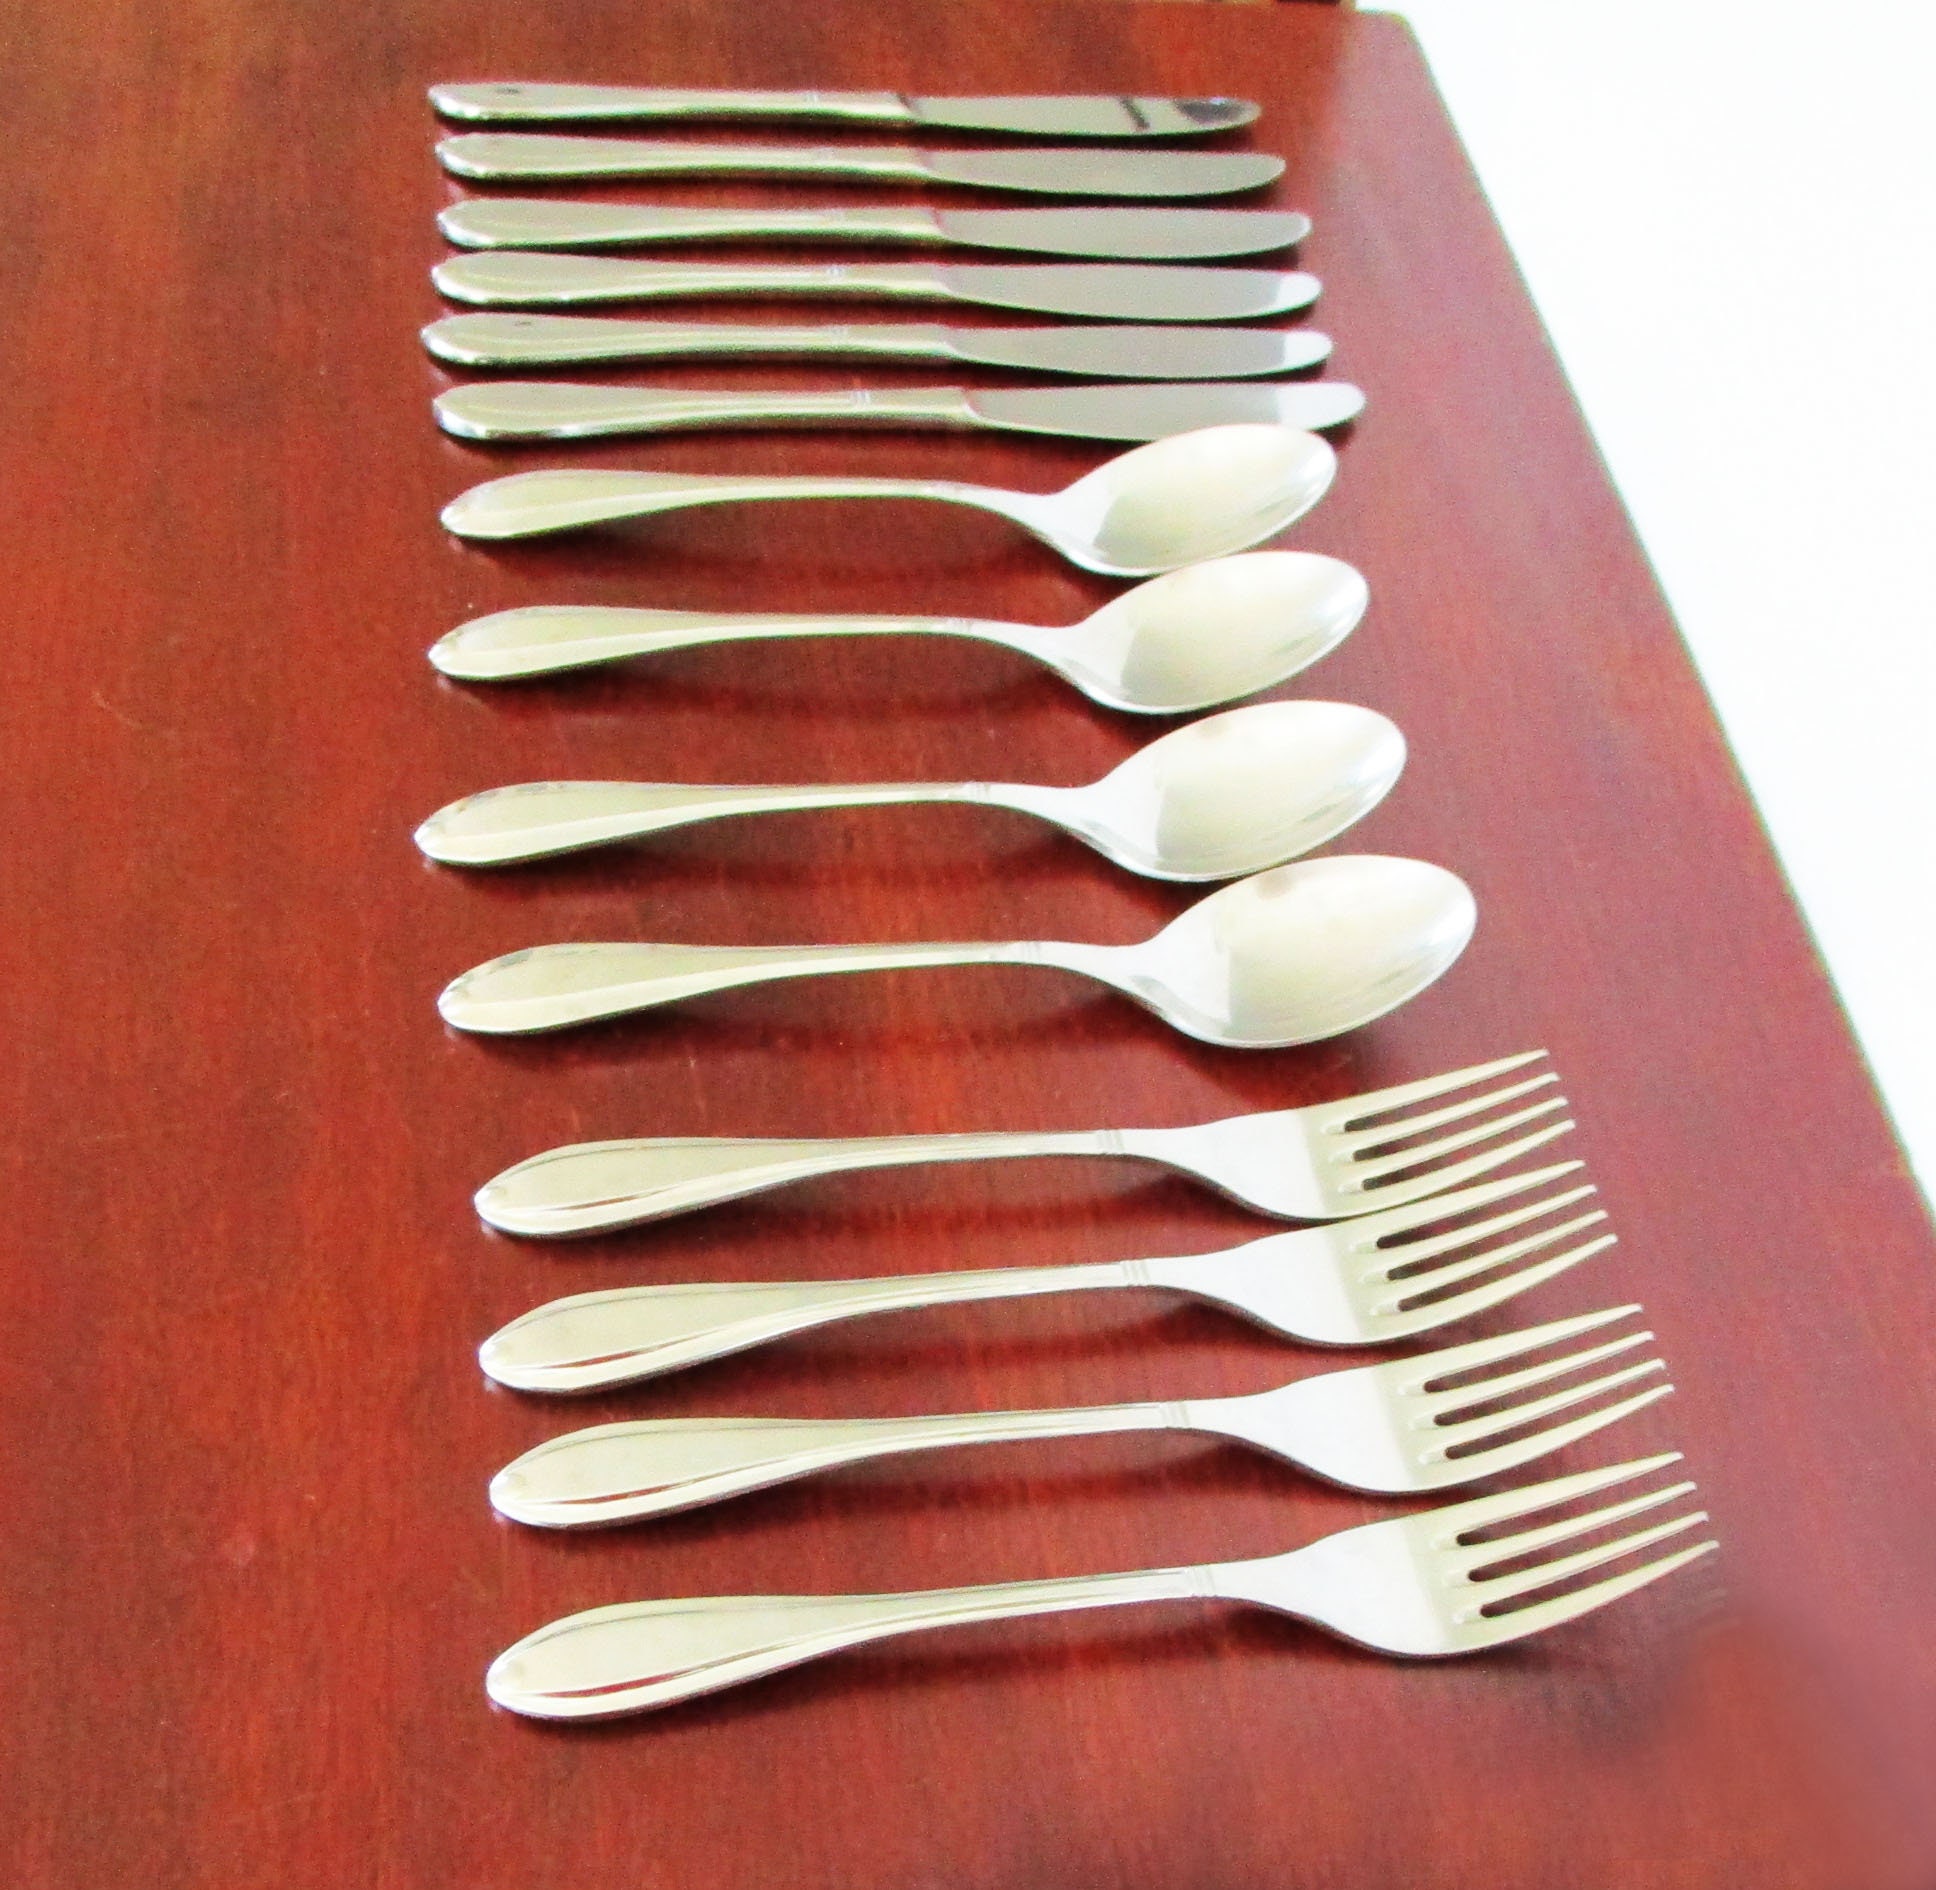 GUY DEGRENNE PERLES FRANCE (STAINLESS) 5 piece place setting (more avail)